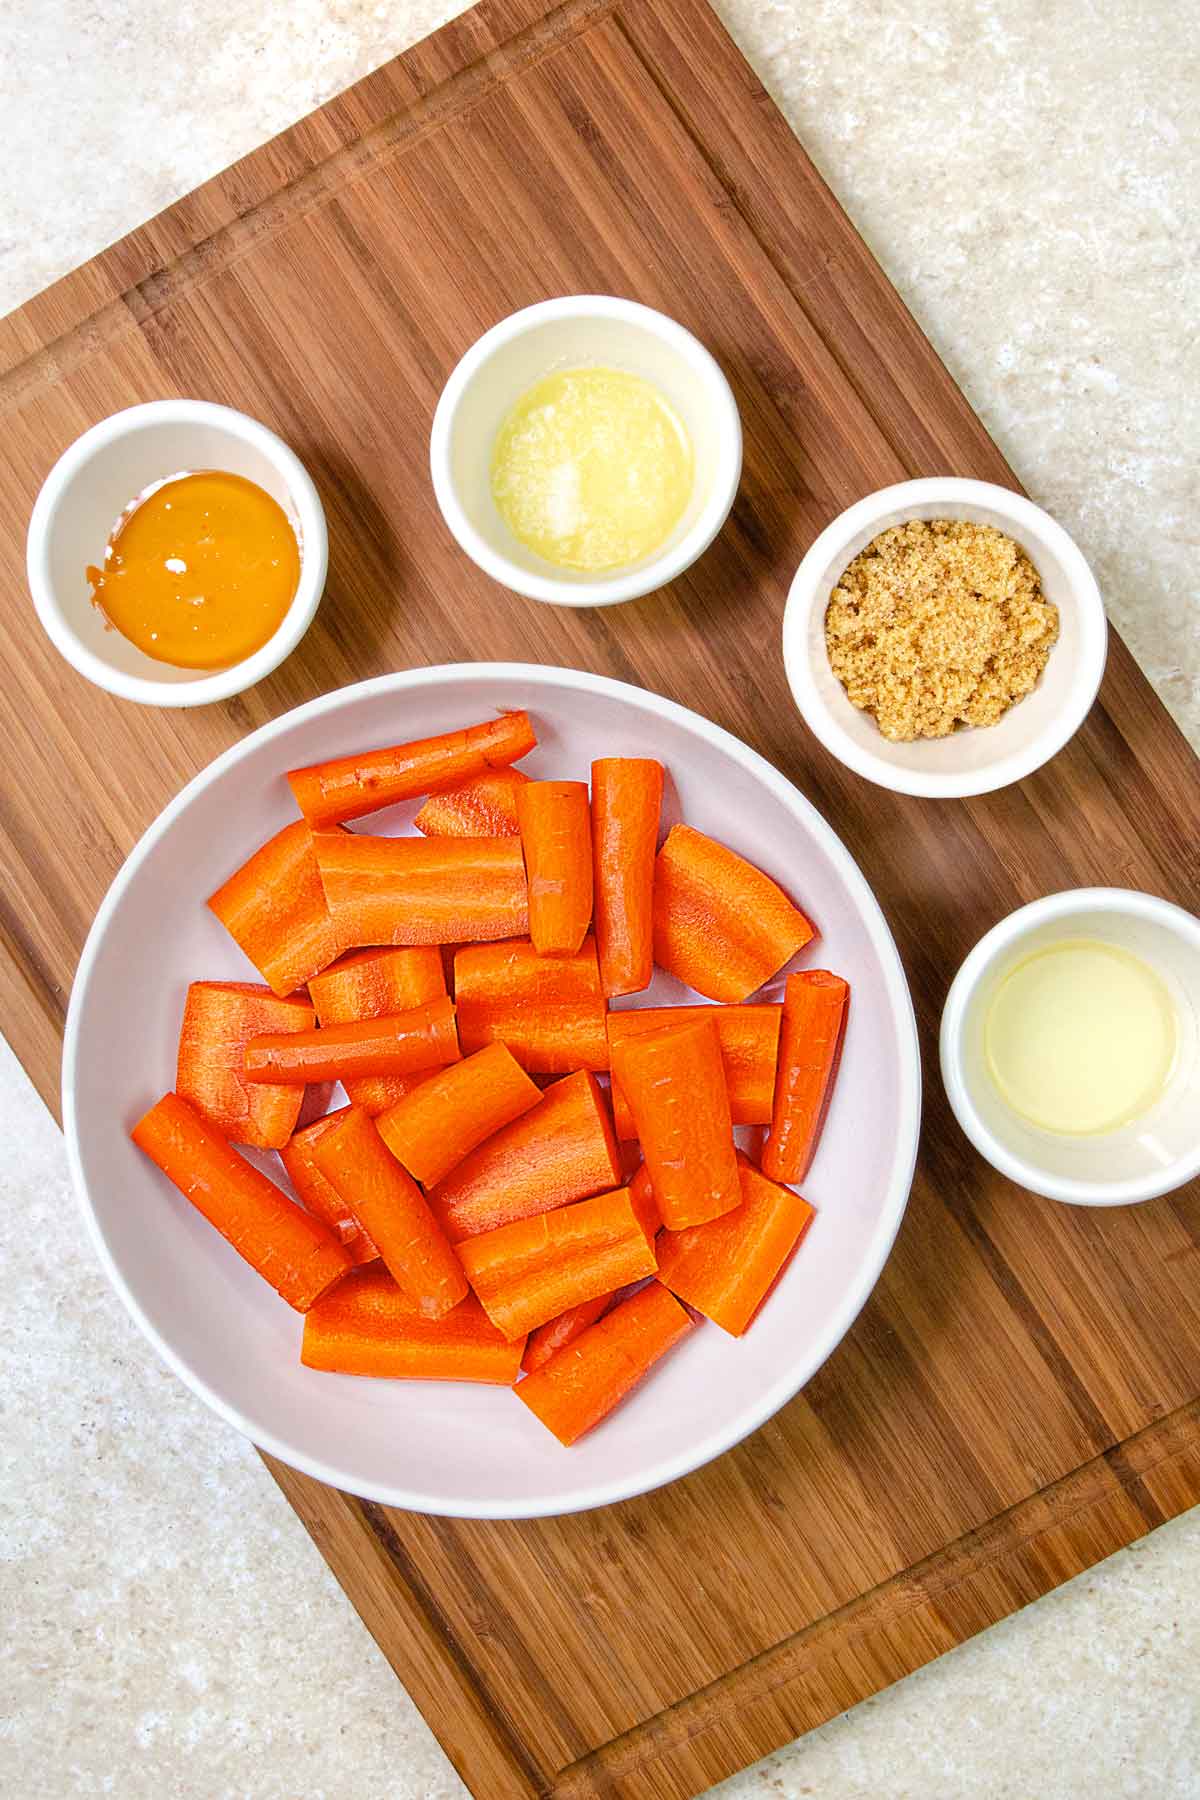 cut the carrots into 1-inch pieces